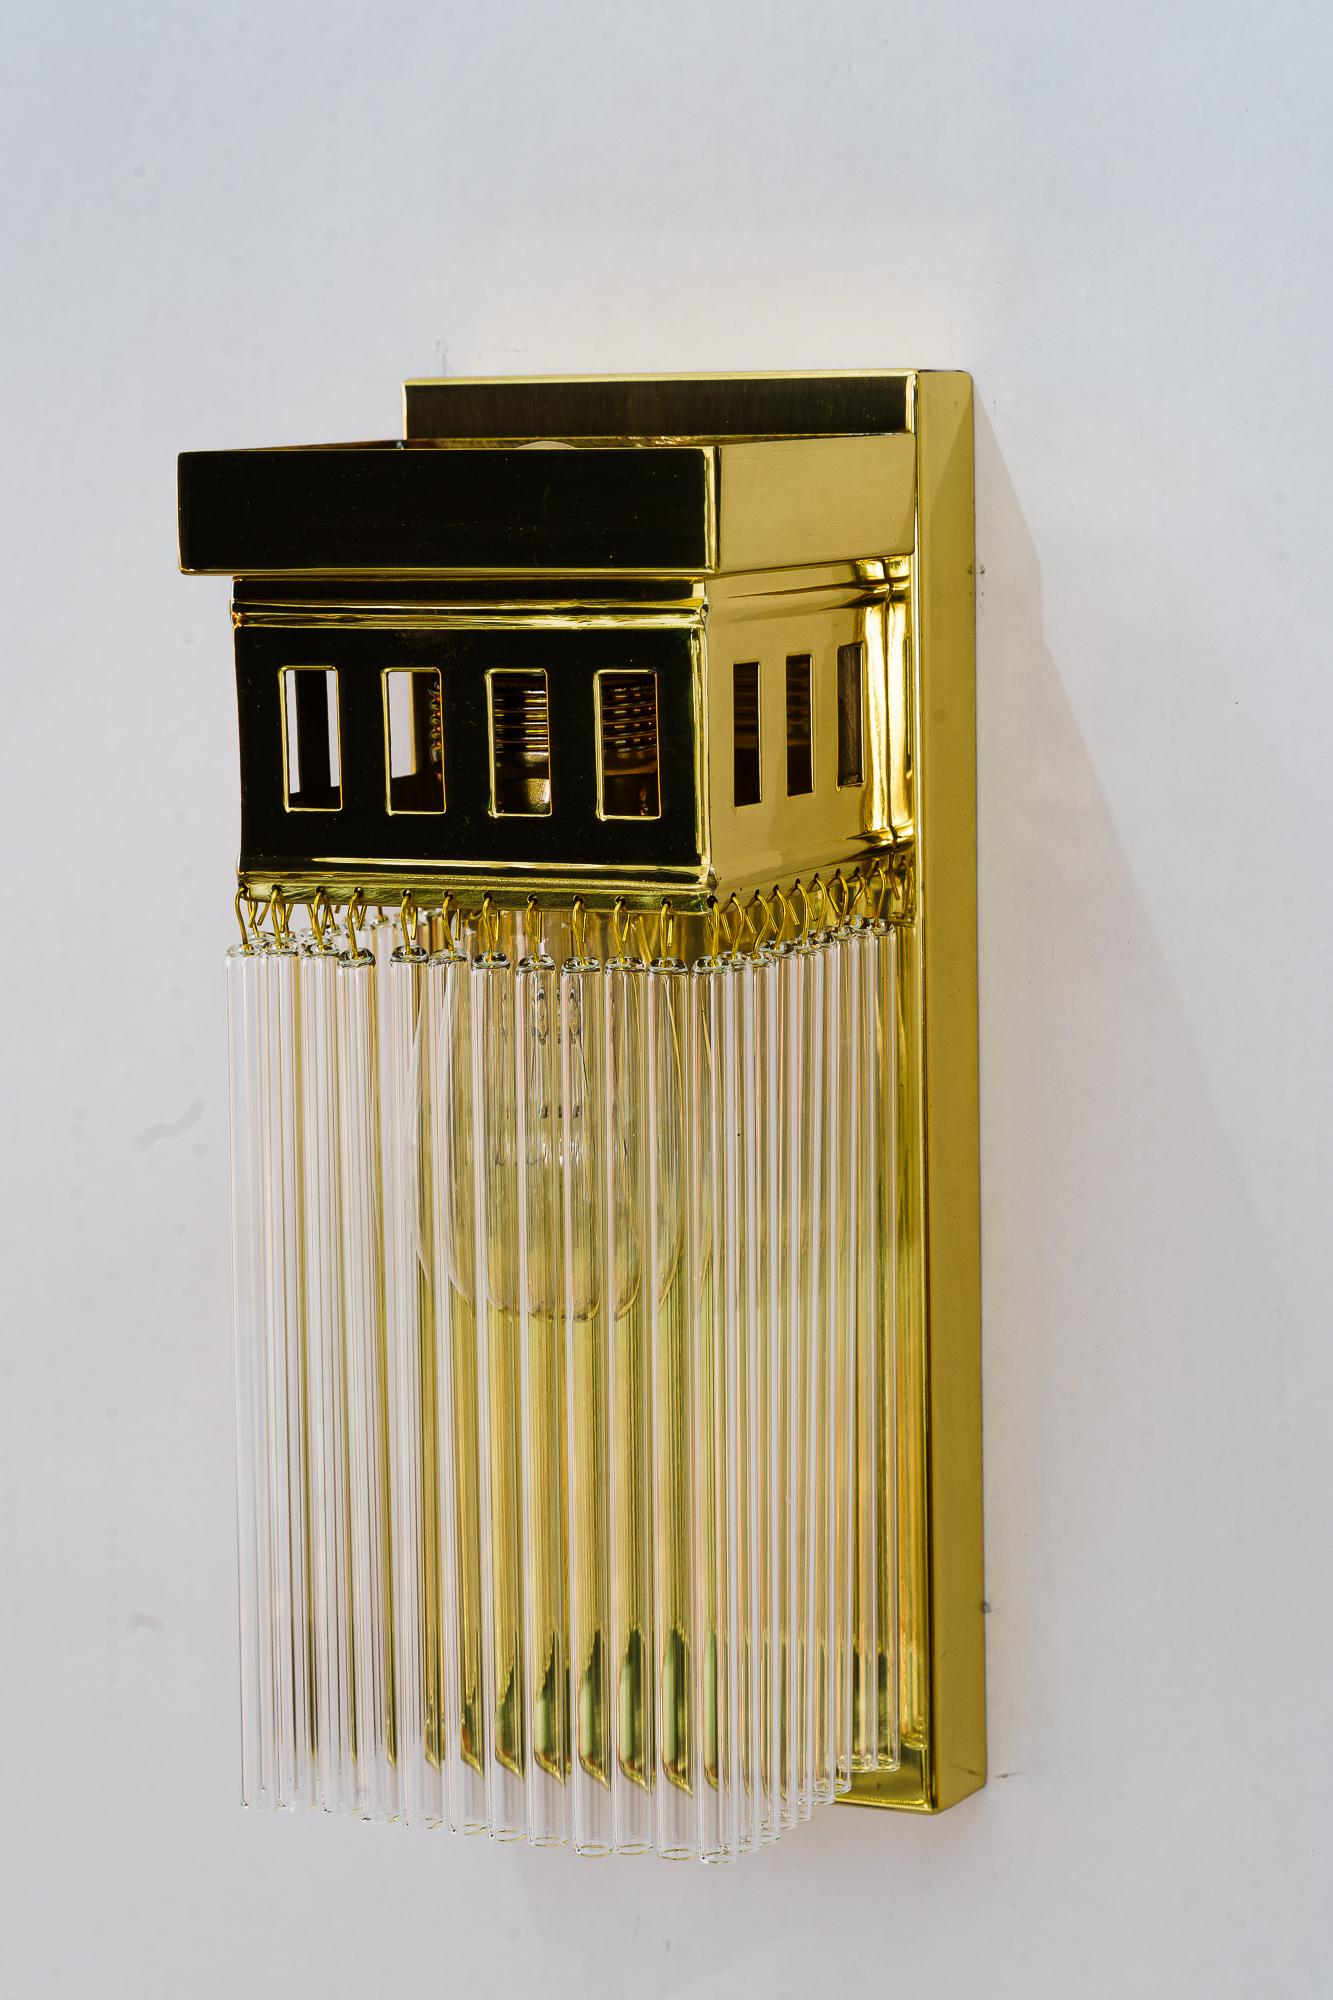 Art Deco Reproduction of a art deco wall lamp with glass sticks For Sale